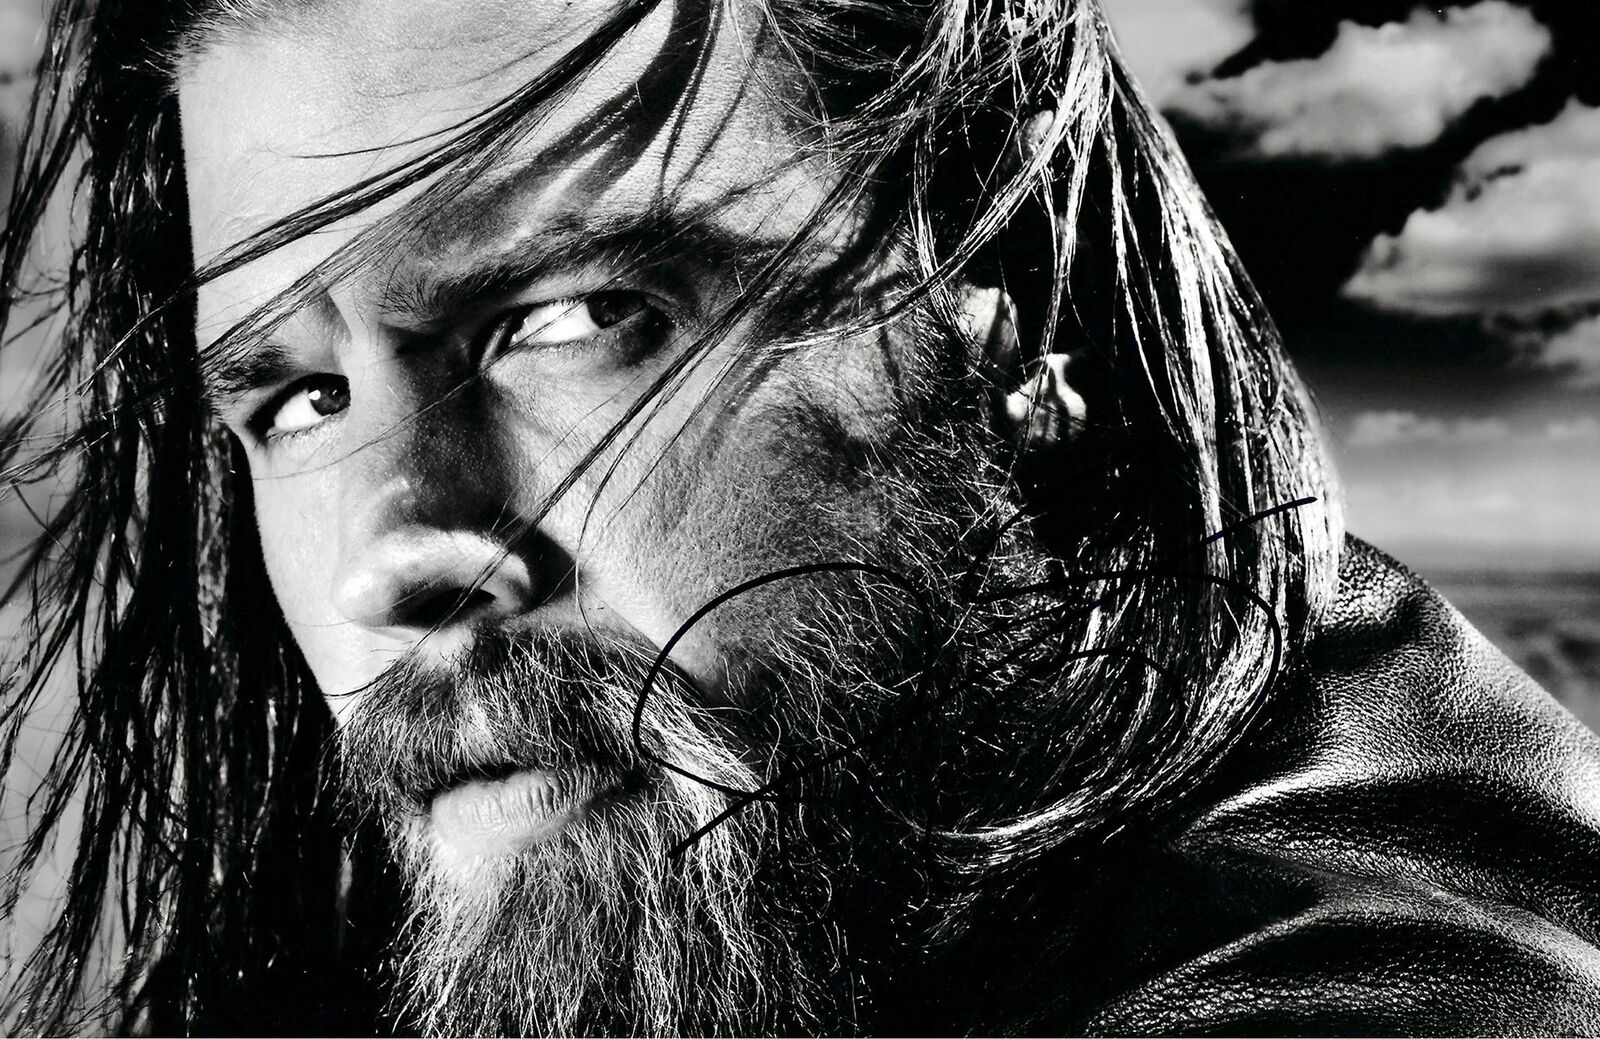 RYAN HURST SIGNED OPIE SONS OF ANARCHY 12x8 PHOTO 2 (AFTAL COA)